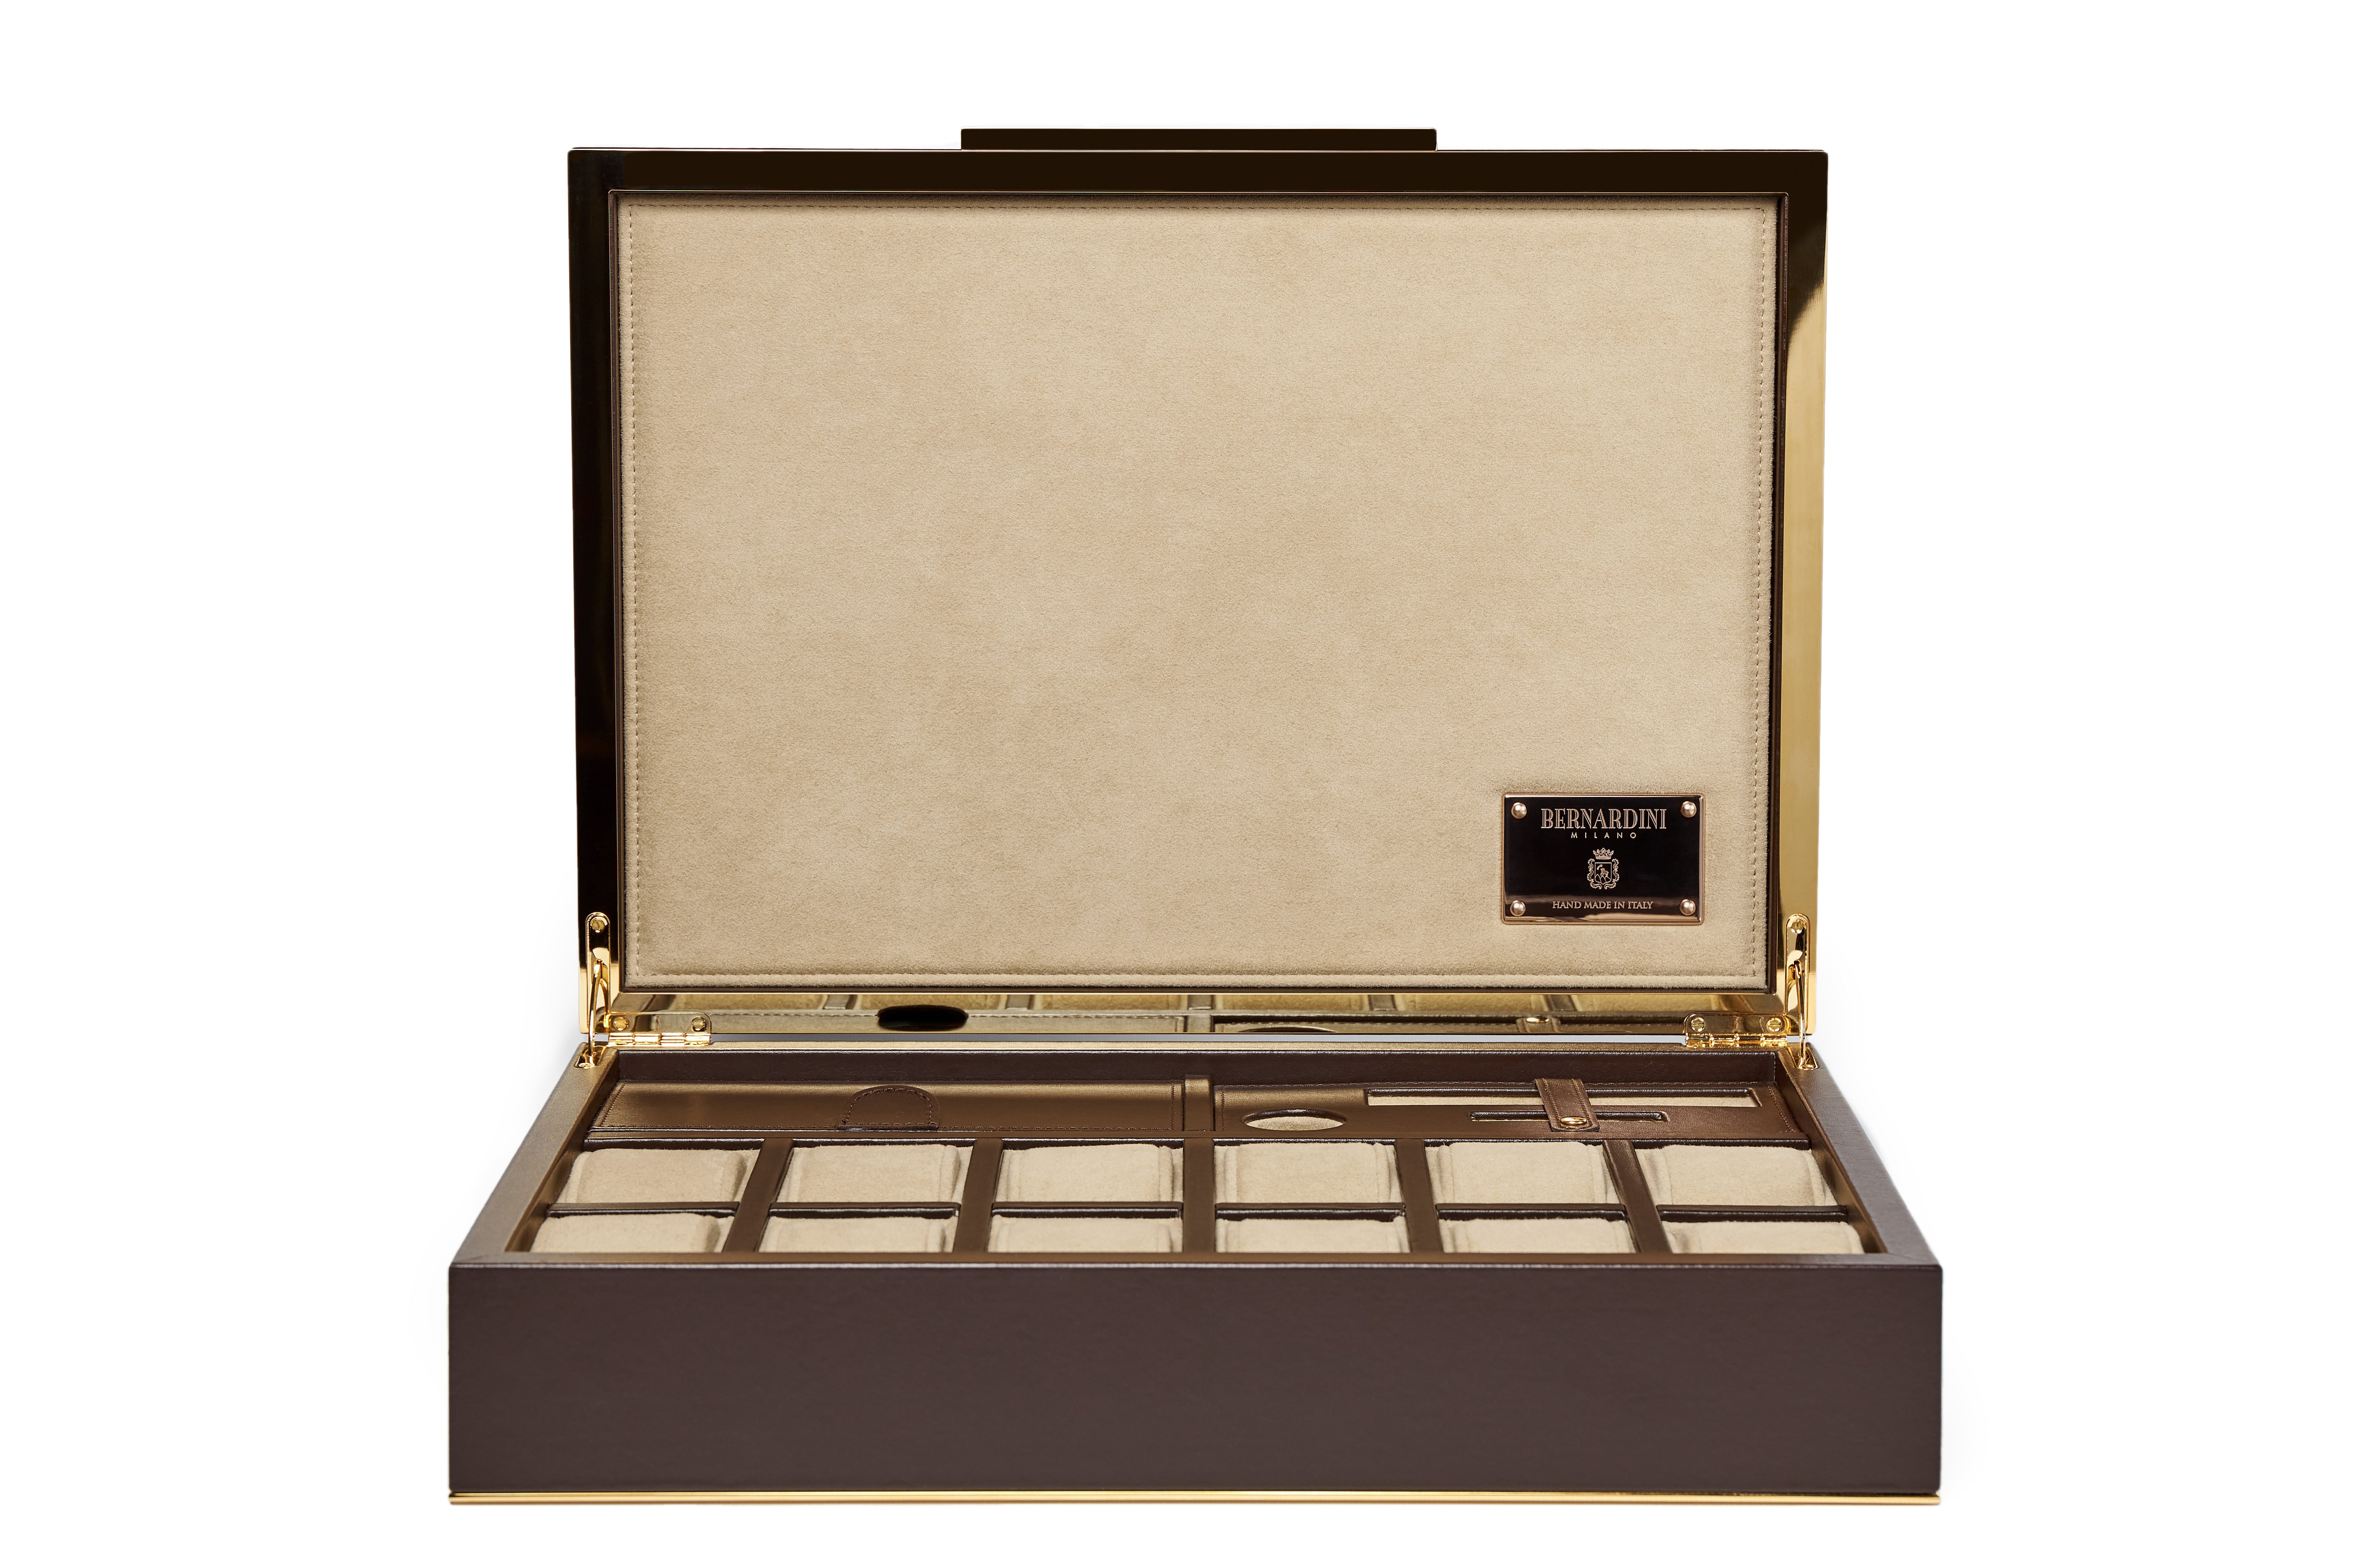 Bernardini Milano Watch Holder - Deep Brown leather and Sand alcantara with yellow gold plated details